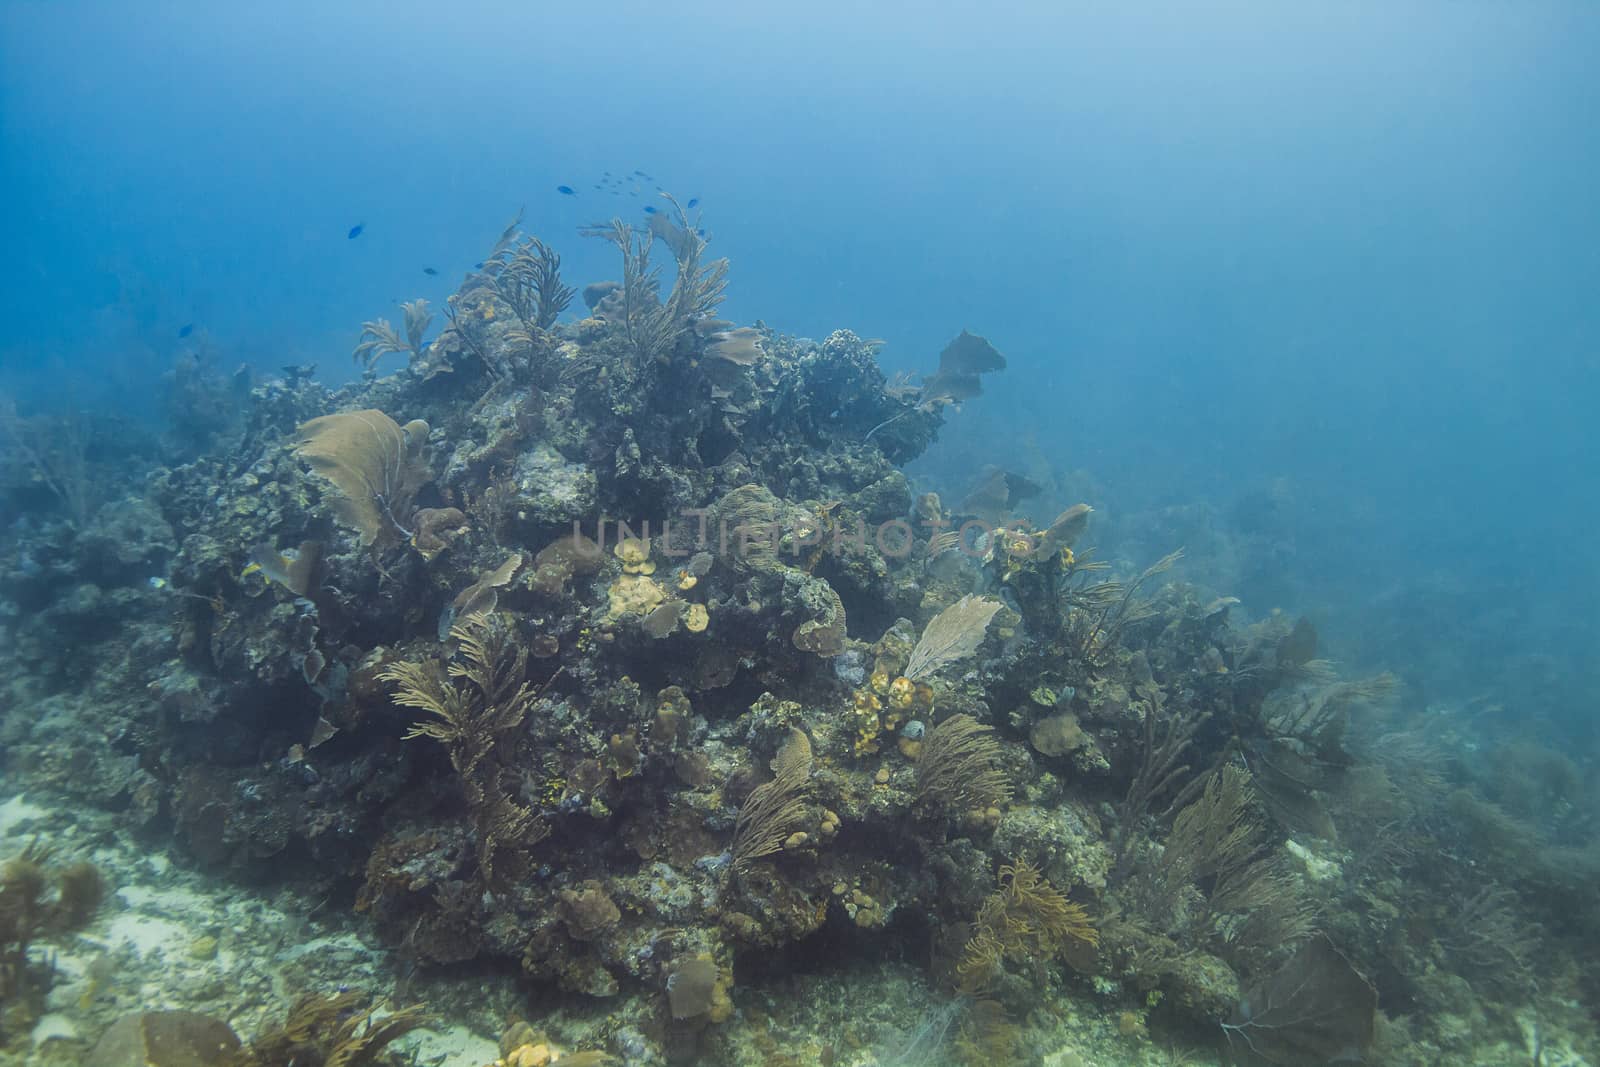 Large mount of coral deep in the ocean